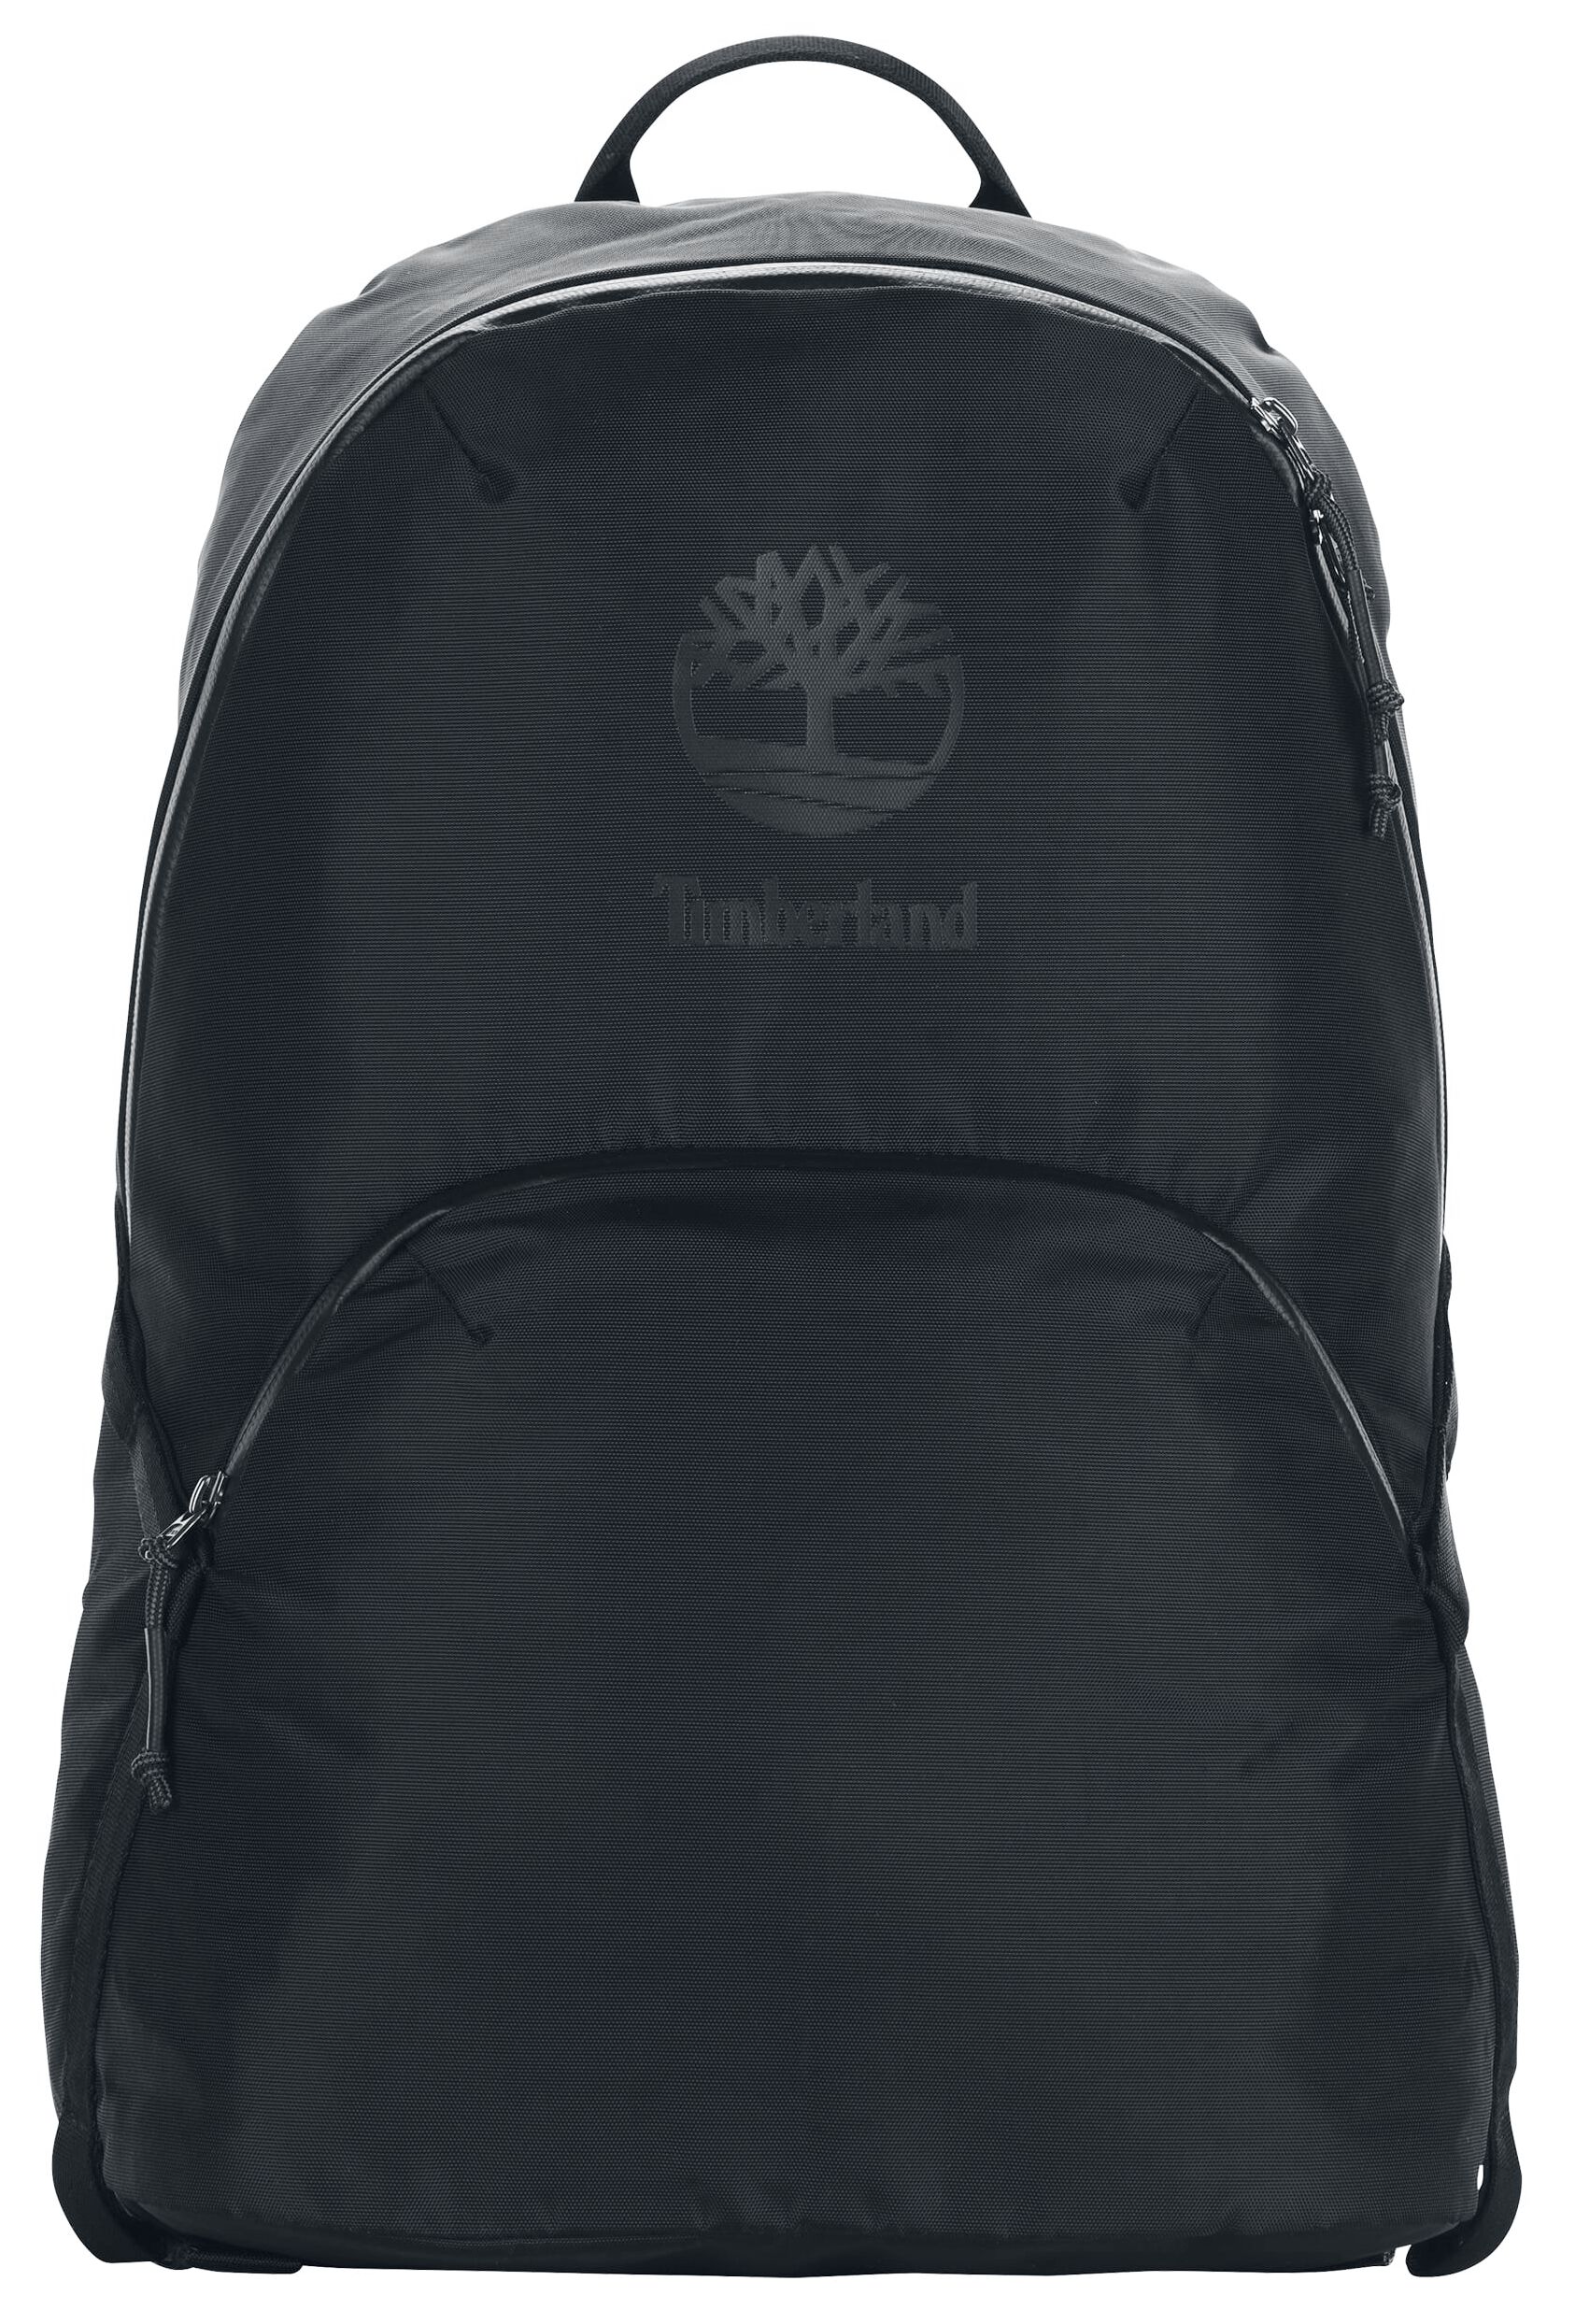 Timberland Outside The City Backpack Backpack black